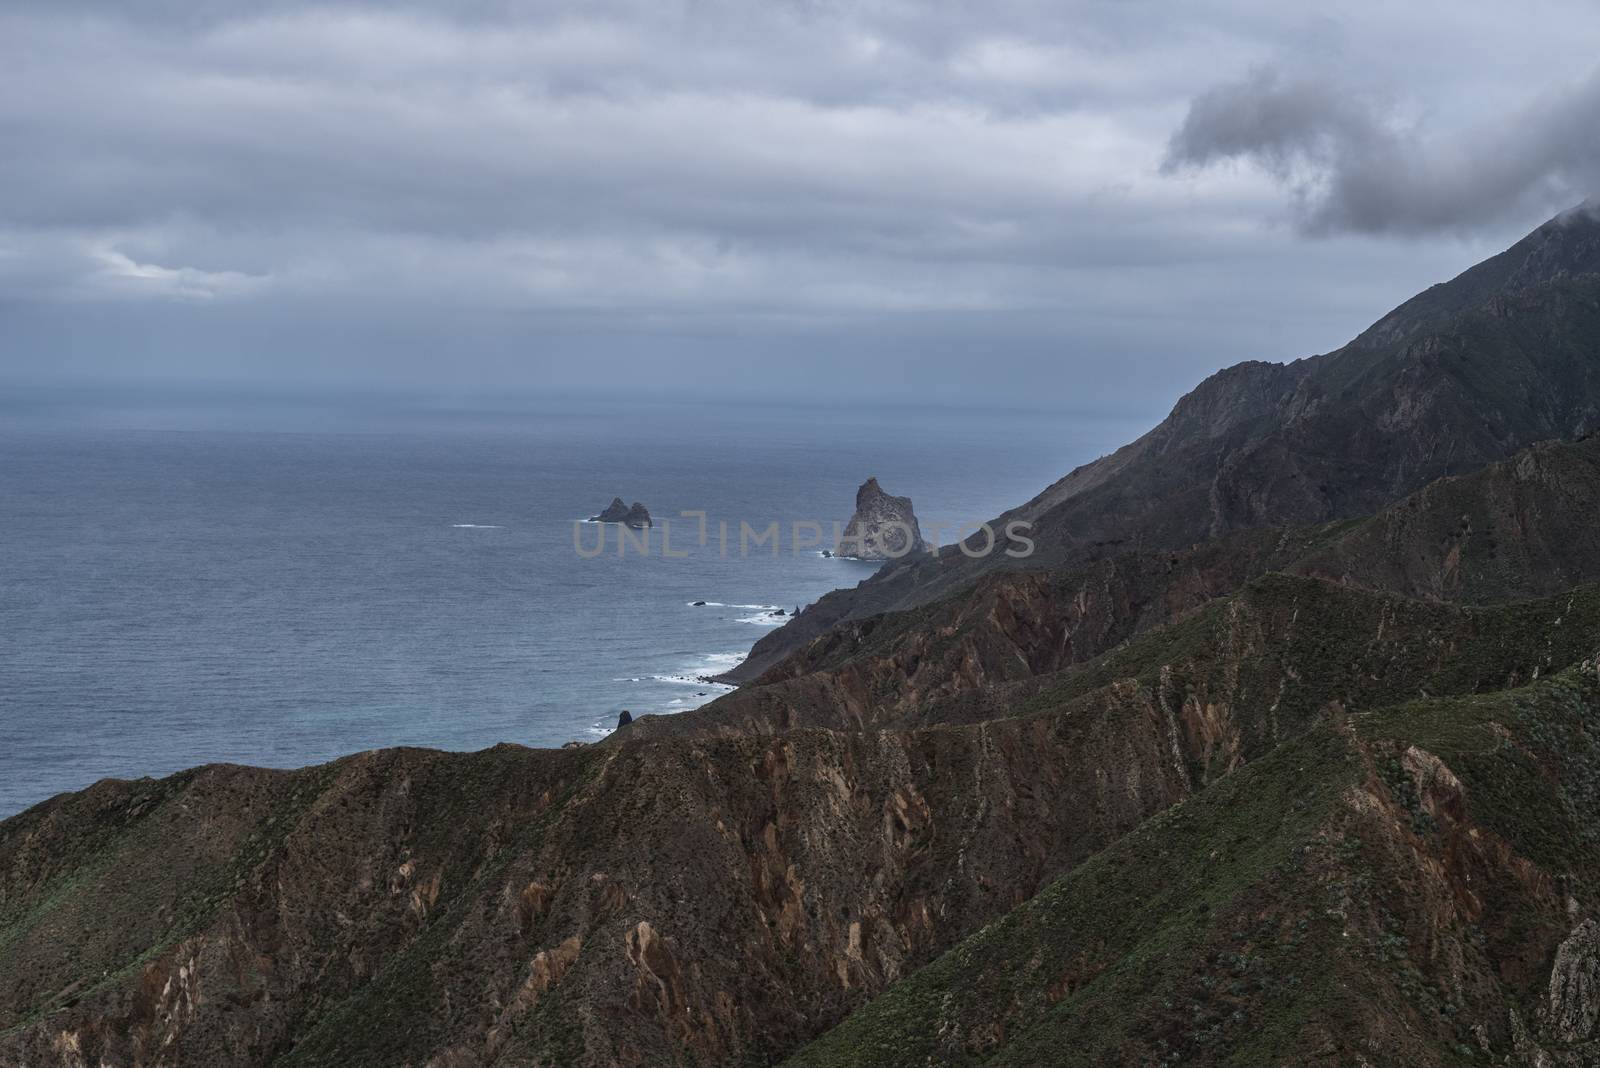 Panoramic landscape in Anaga mountains and ocean coastline from  by Smoke666